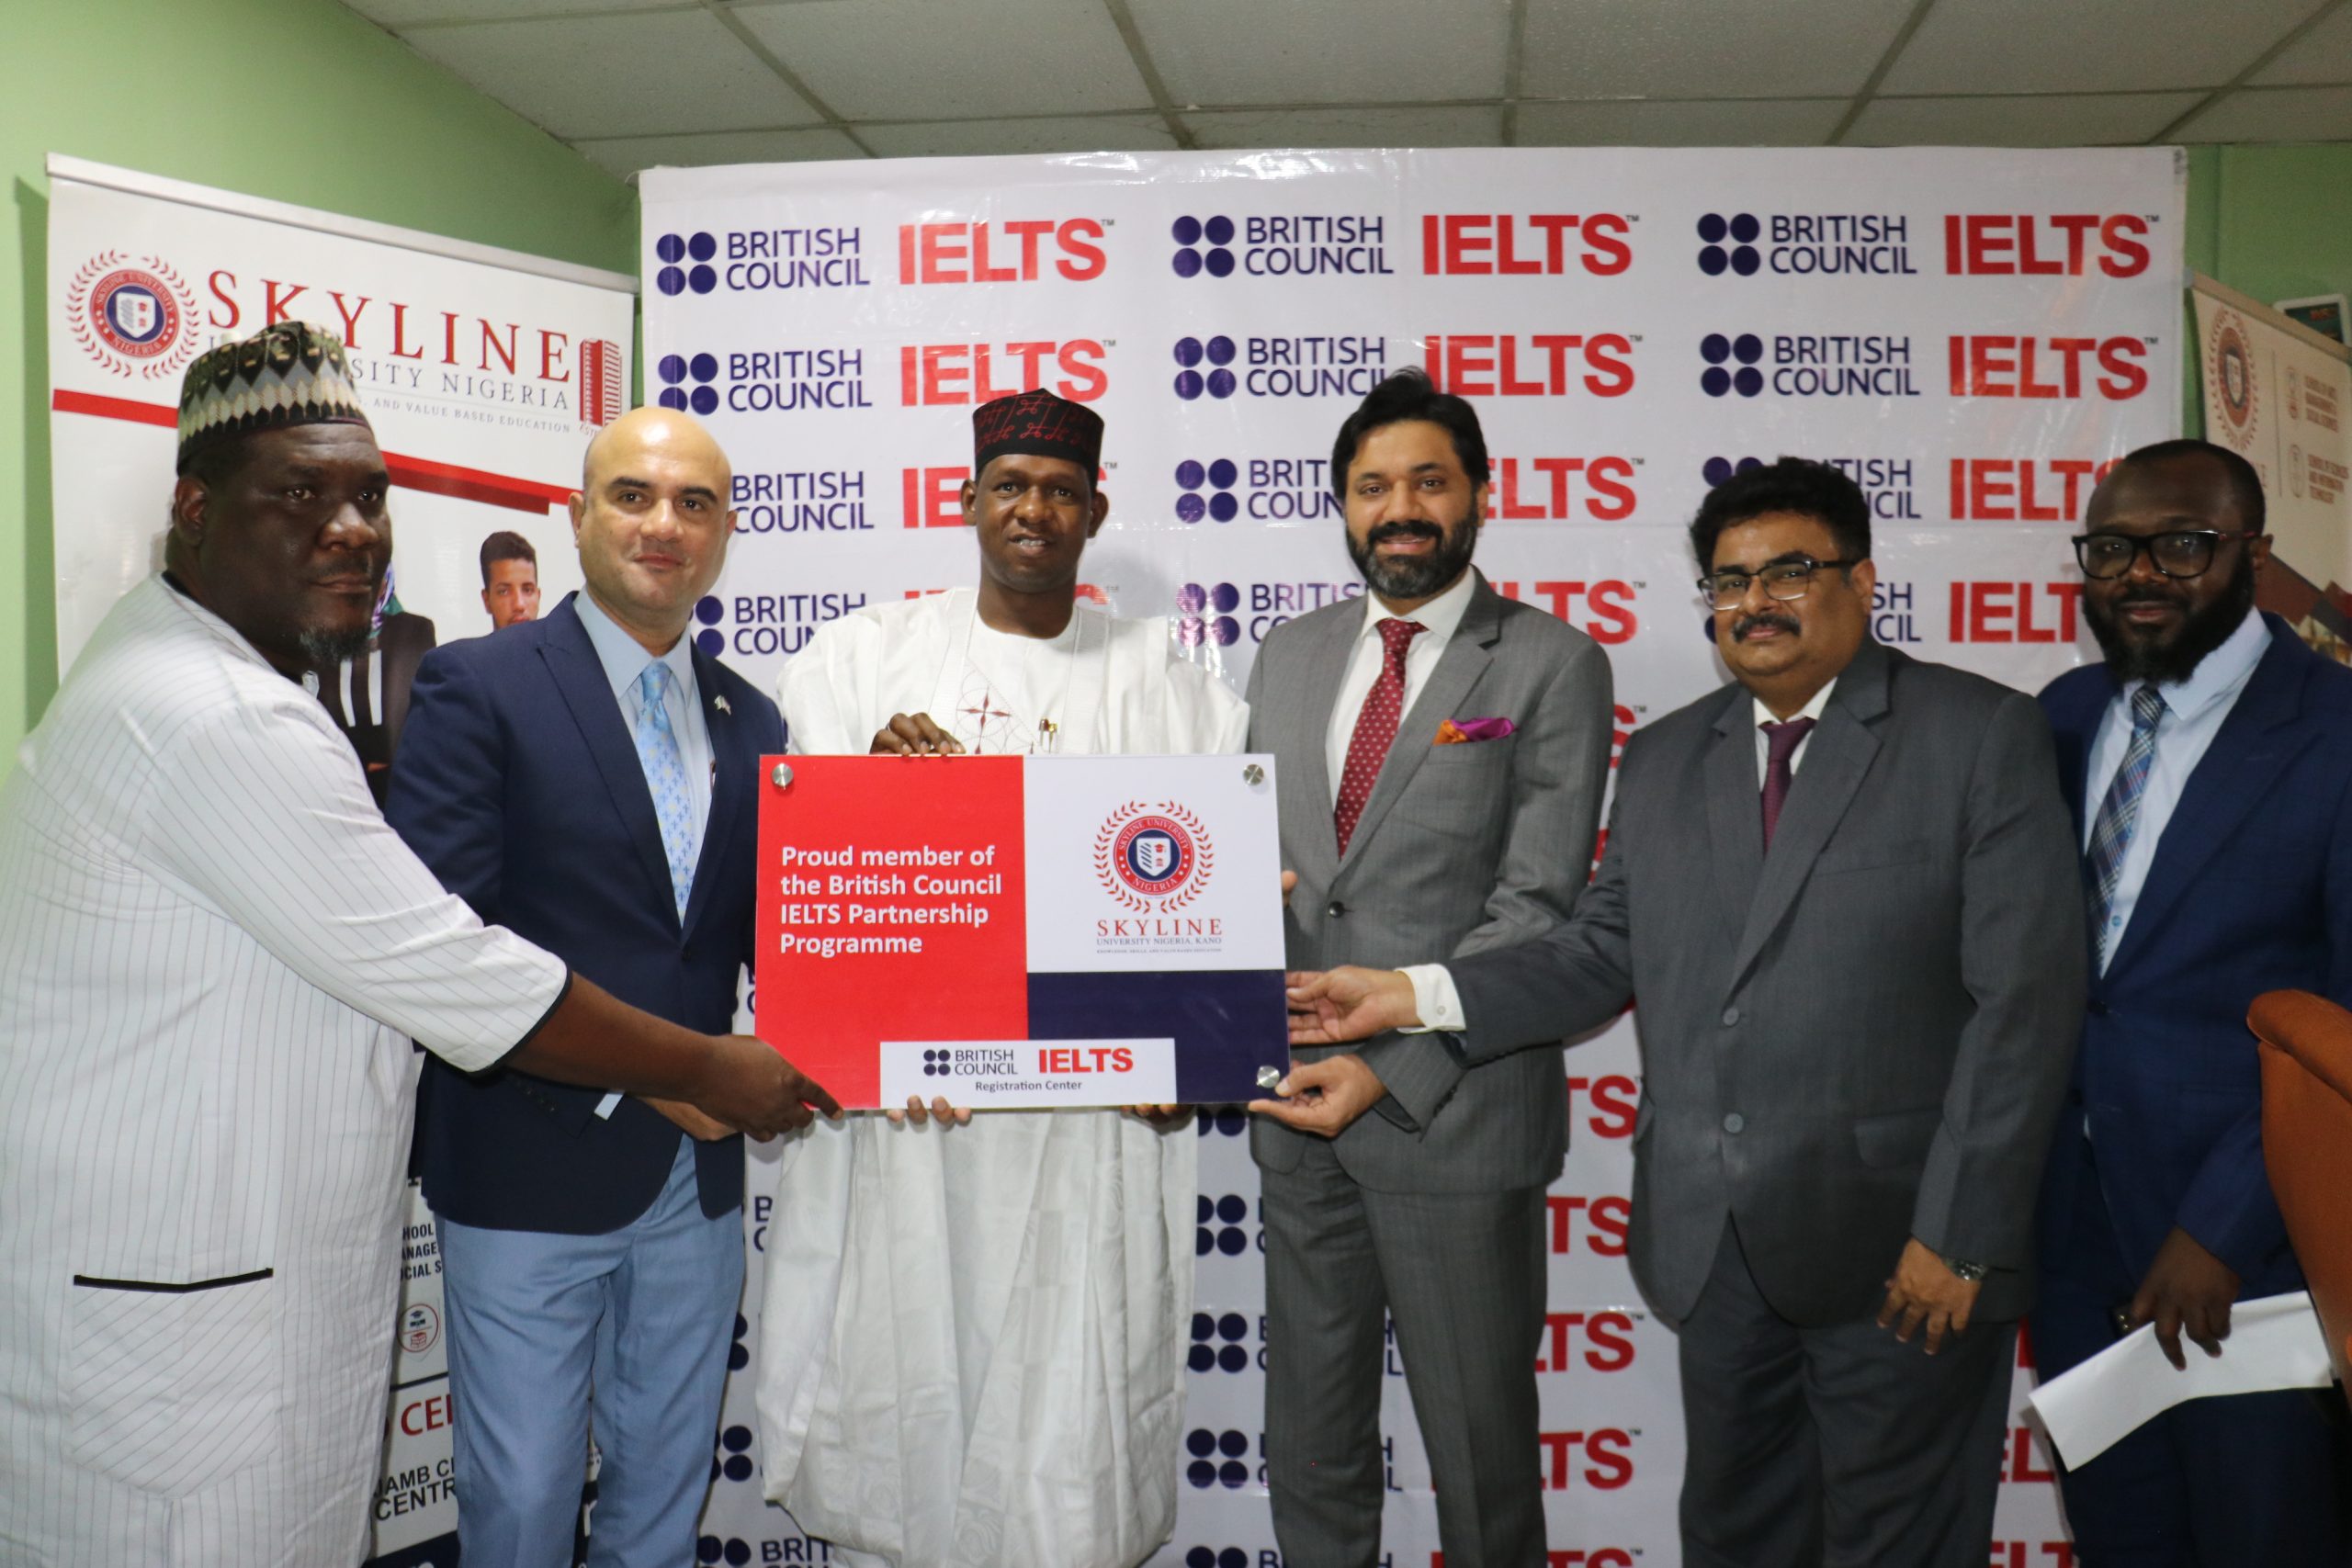 Skyline University Nigeria launches IELTS Test Center and partnership with British Council Nigeria